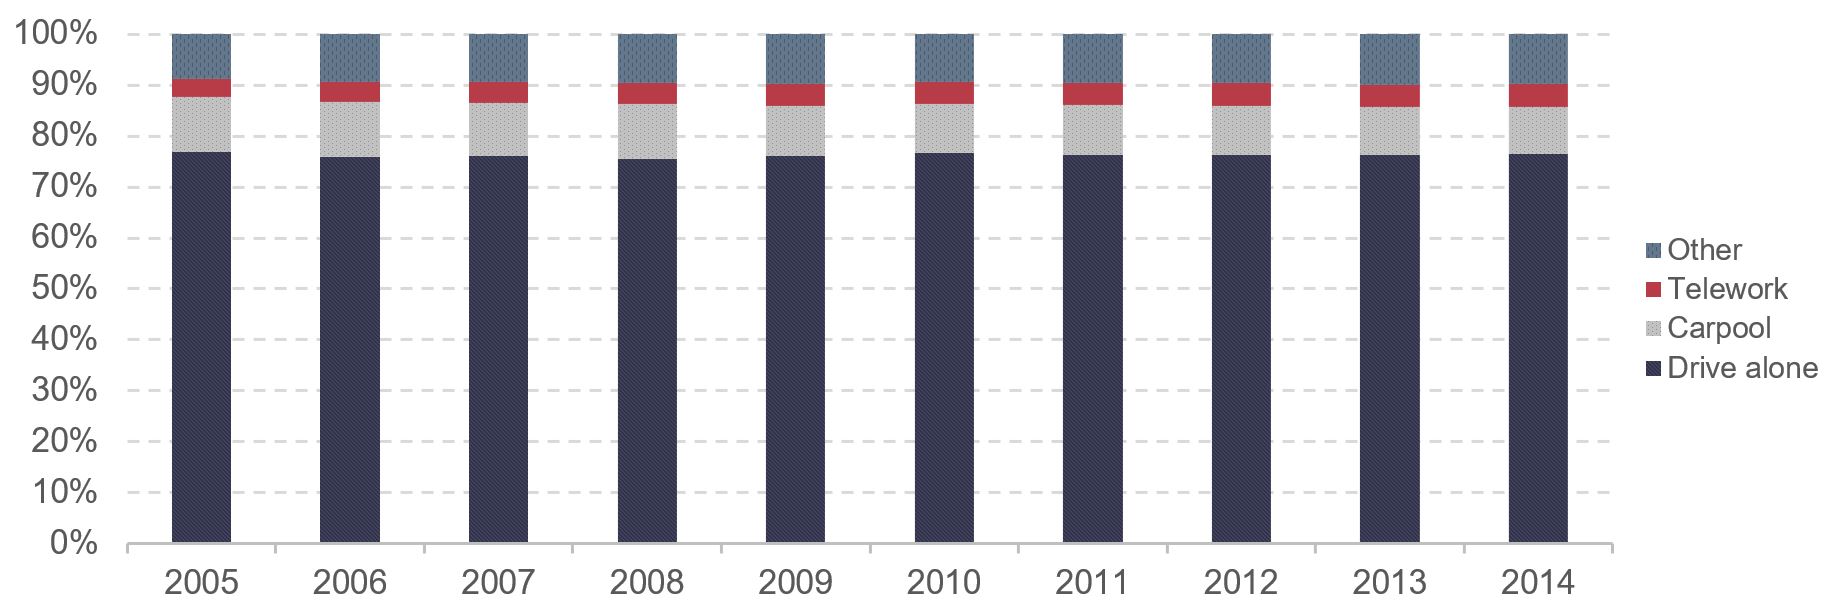 A stacked bar chart shows the share of workers using four different commuting modes for the years 2005 through 2014. The share of workers using each mode has stayed nearly constant during the time series. The share driving alone started at 77.0 percent in 2005 and decreased to 76.5 percent in 2014. The share of carpooling started at 10.7 percent in 2005 and decreased to 9.2 percent in 2014. The share of teleworking started at 3.6 percent in 2005 and increased to 4.5 percent in 2014. The share of other modes started at 8.8 percent in 2005 and increased to 9.7 percent in 2014. Source: American Community Surveys.